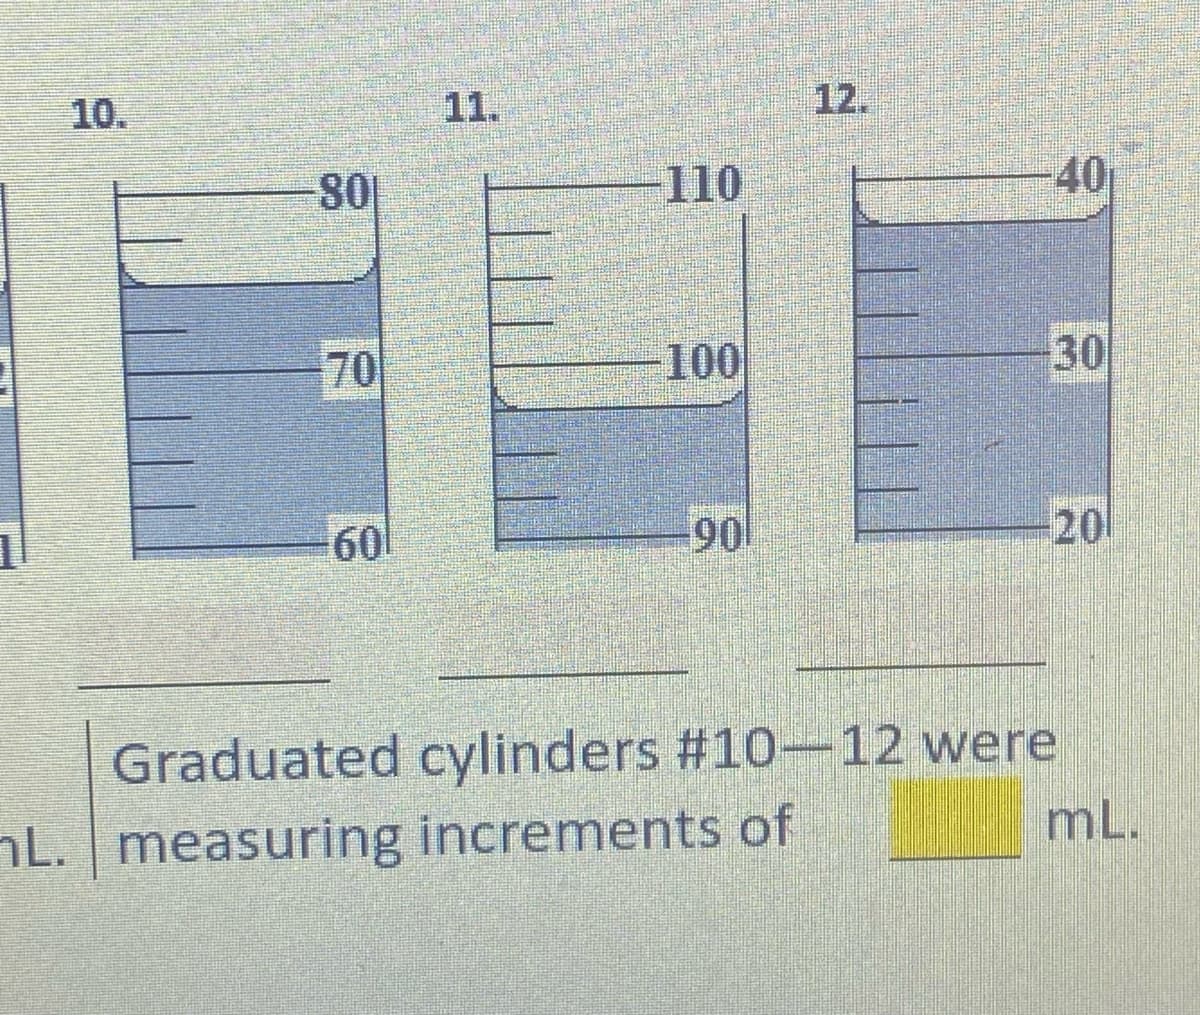 10.
11.
12.
110
-40
70
100
30
60
90
20
Graduated cylinders #10-12 were
nL. measuring increments of
mL.
